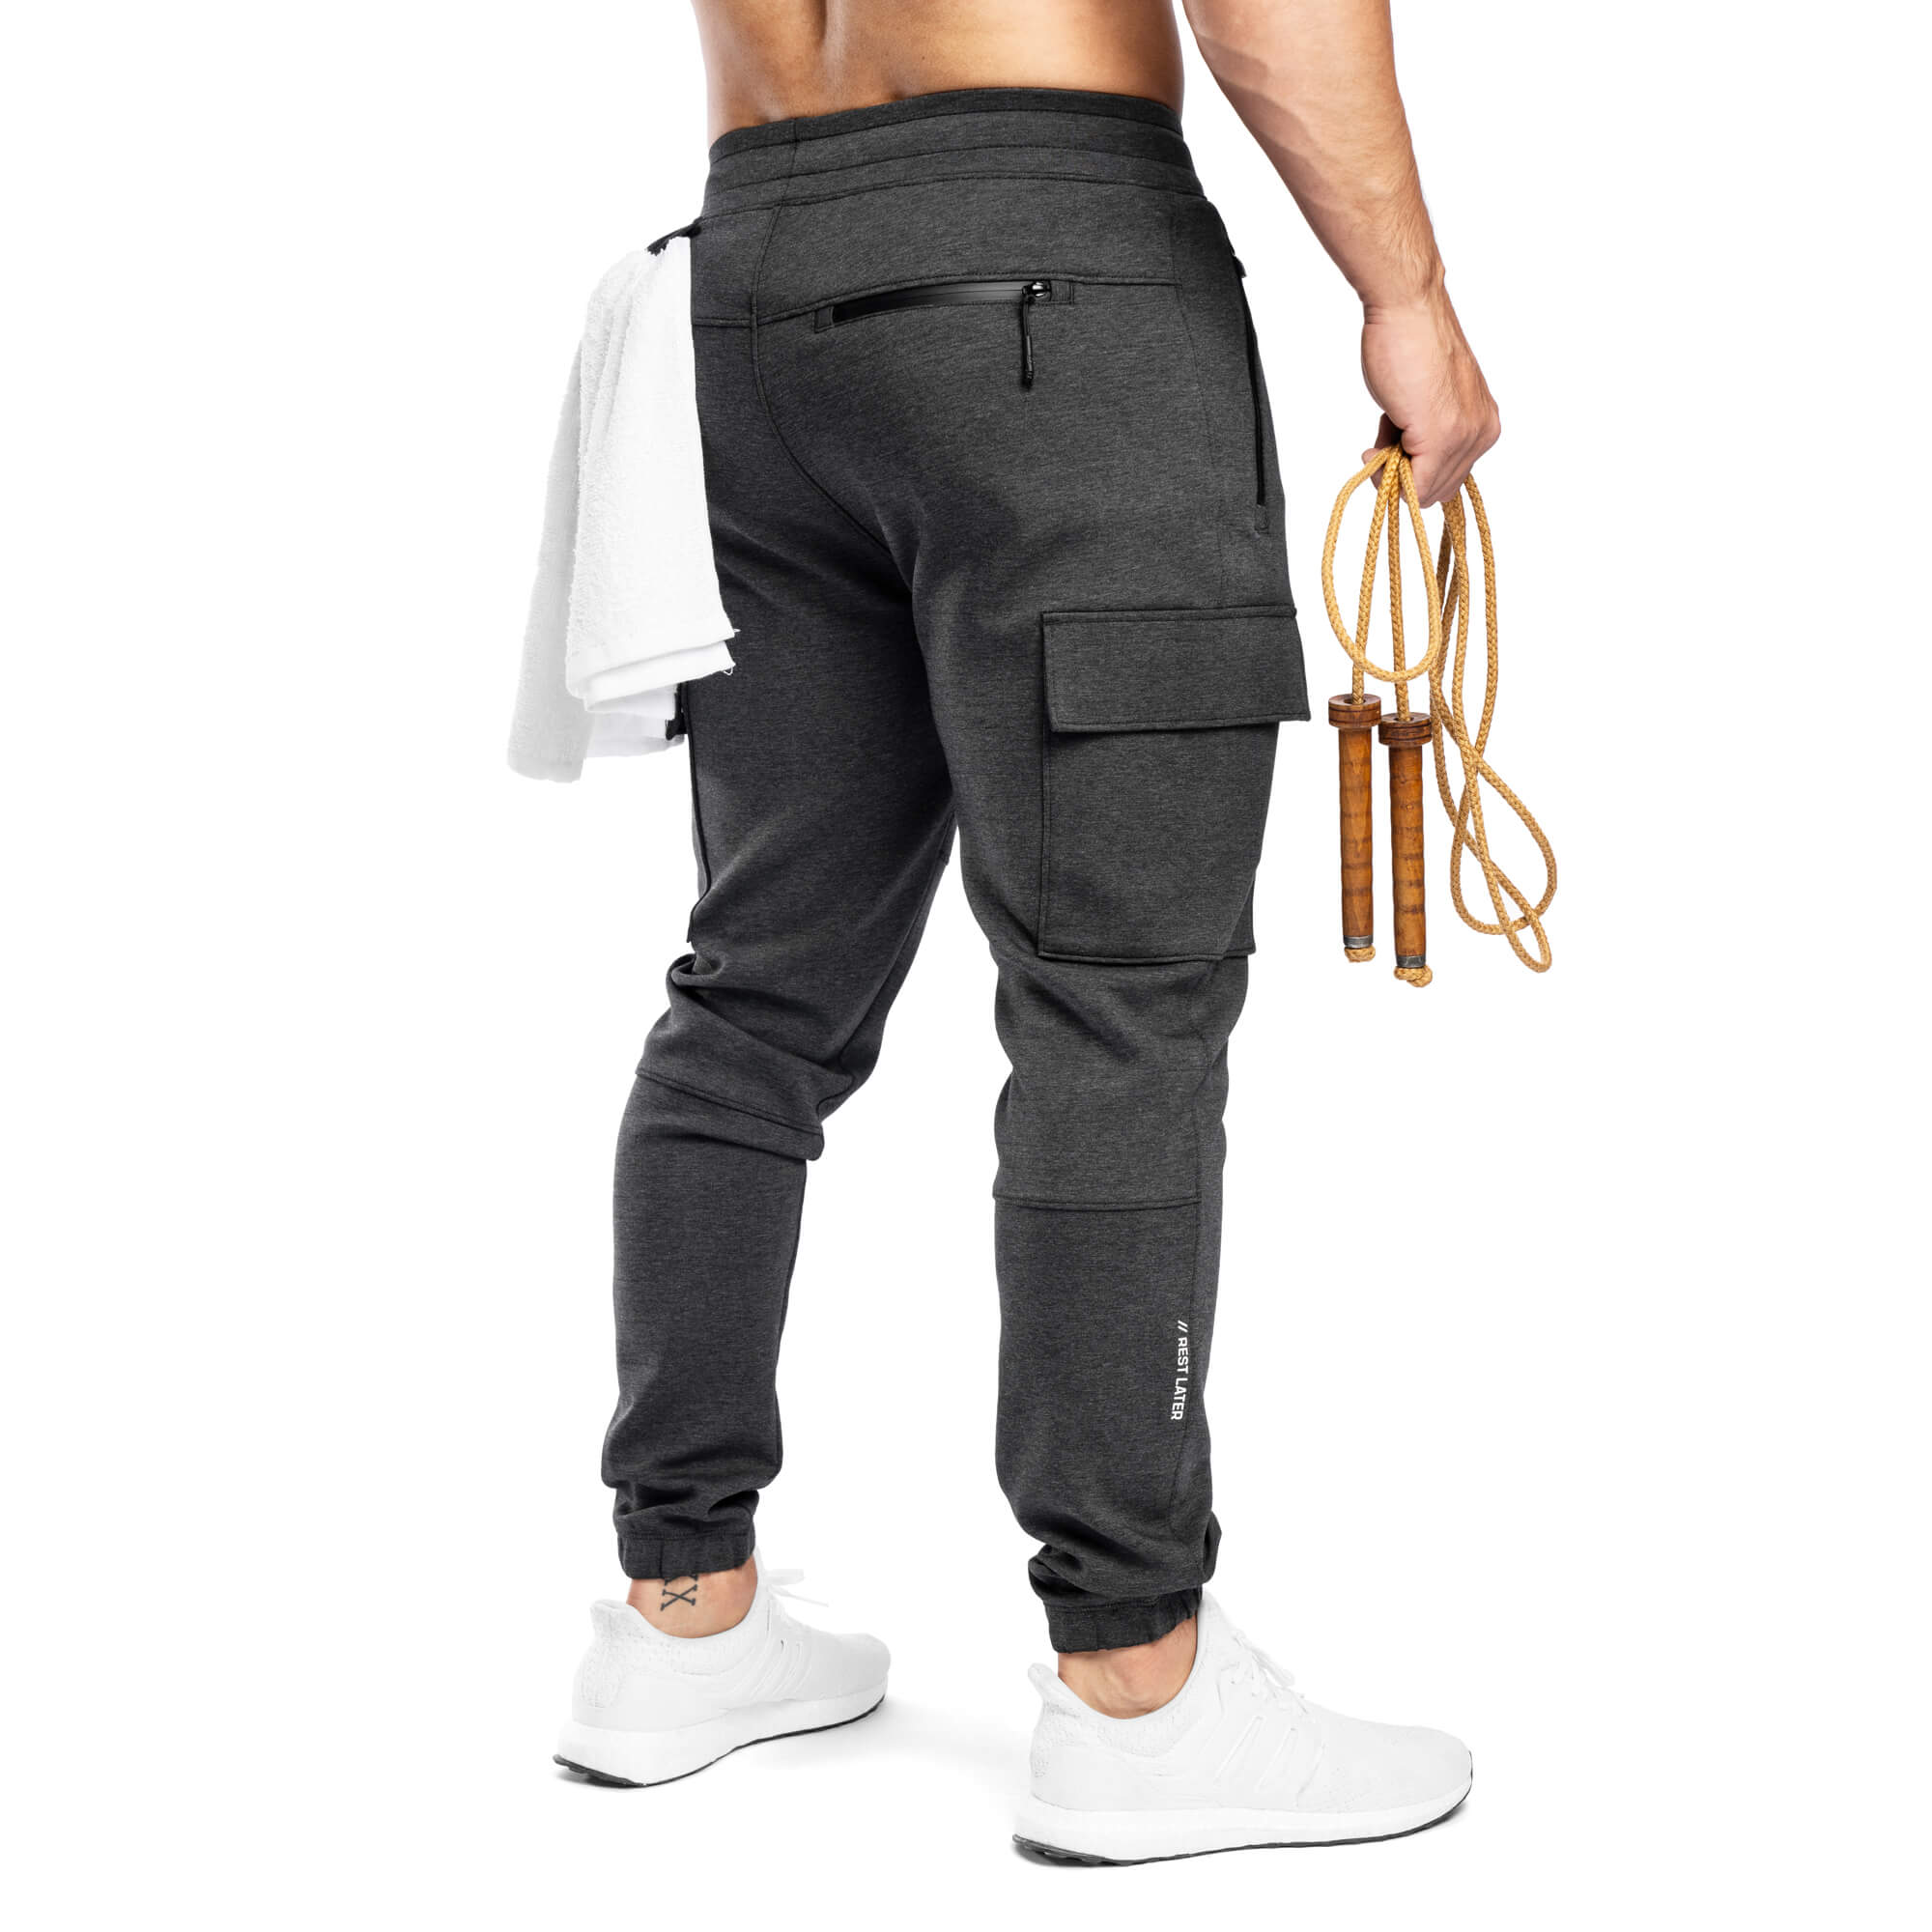 Rest Later Pants - Charcoal Marl